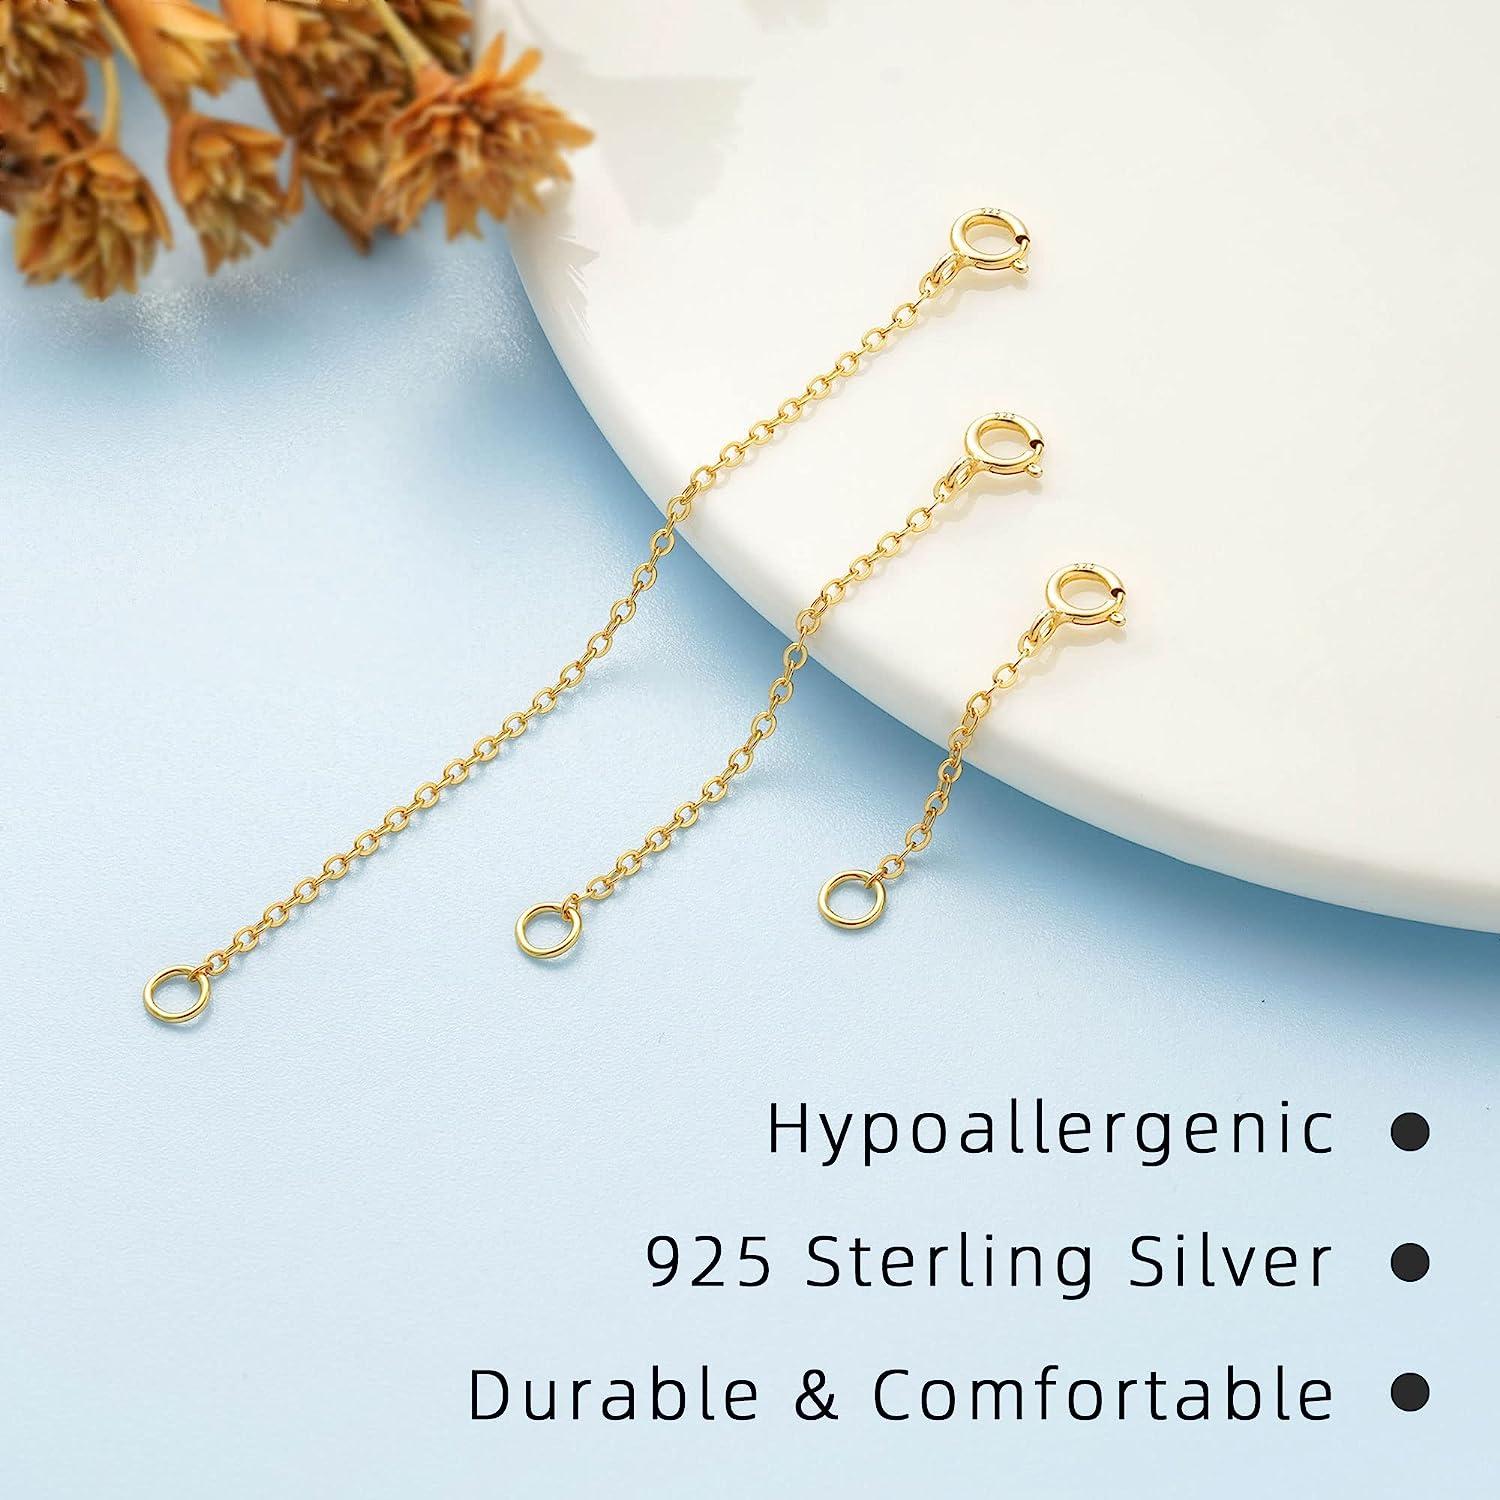 14k gold filled paper clip chain necklace extender 1 -6